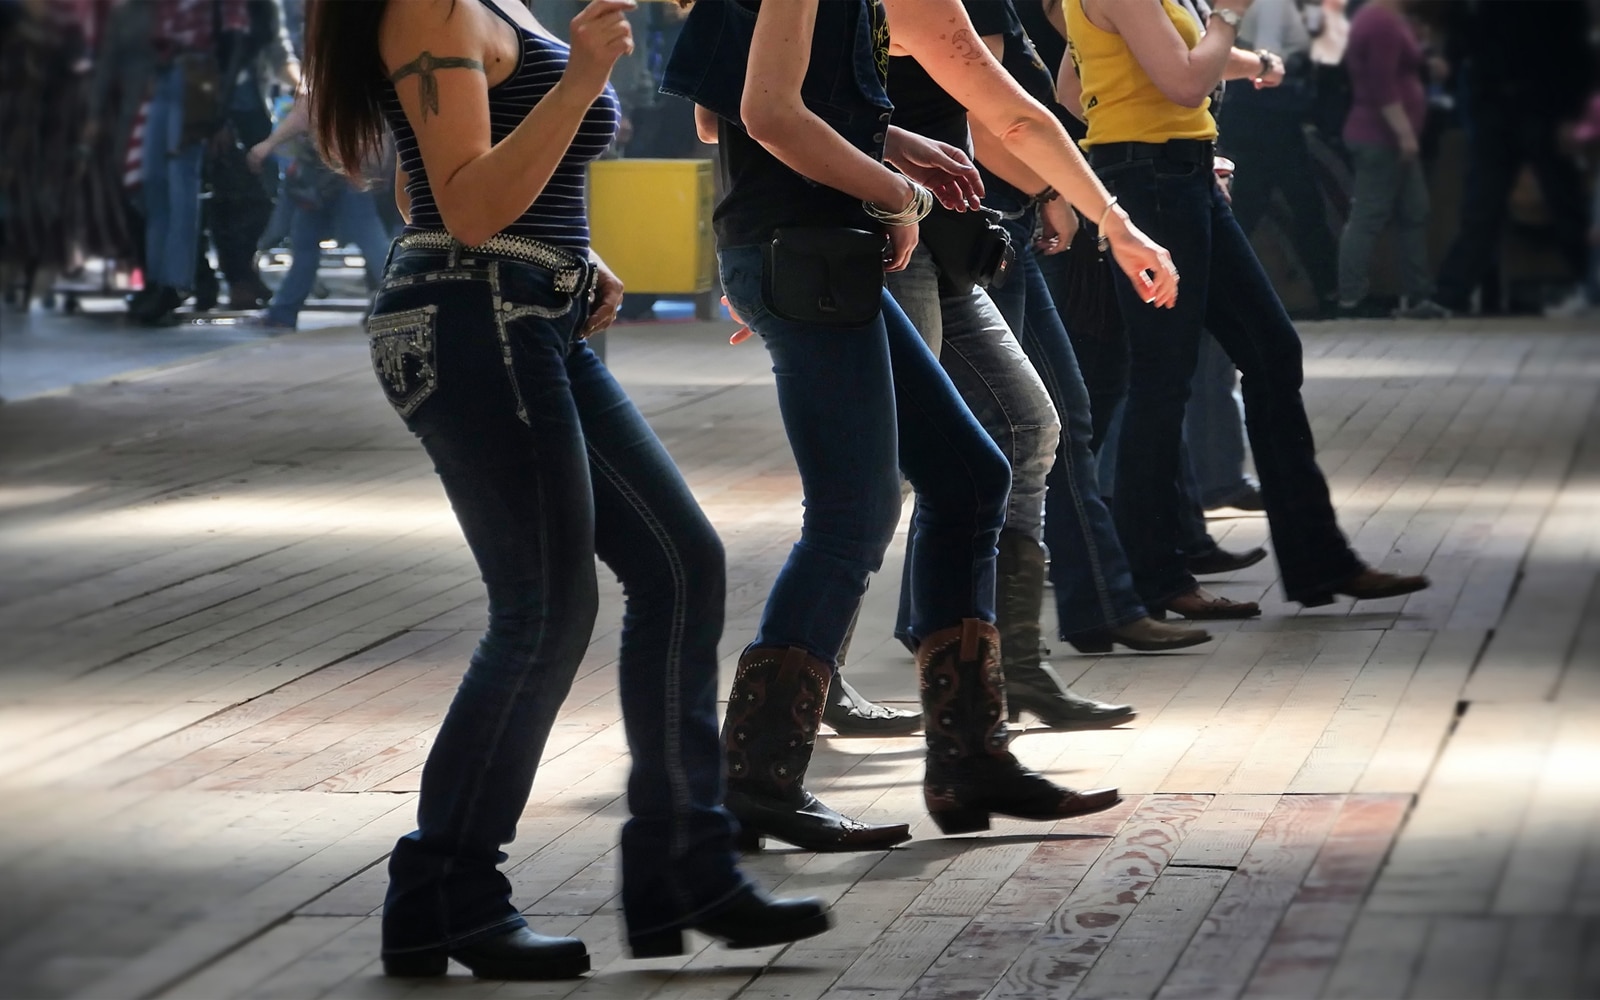 Free Dance Lessons - Line Dancing